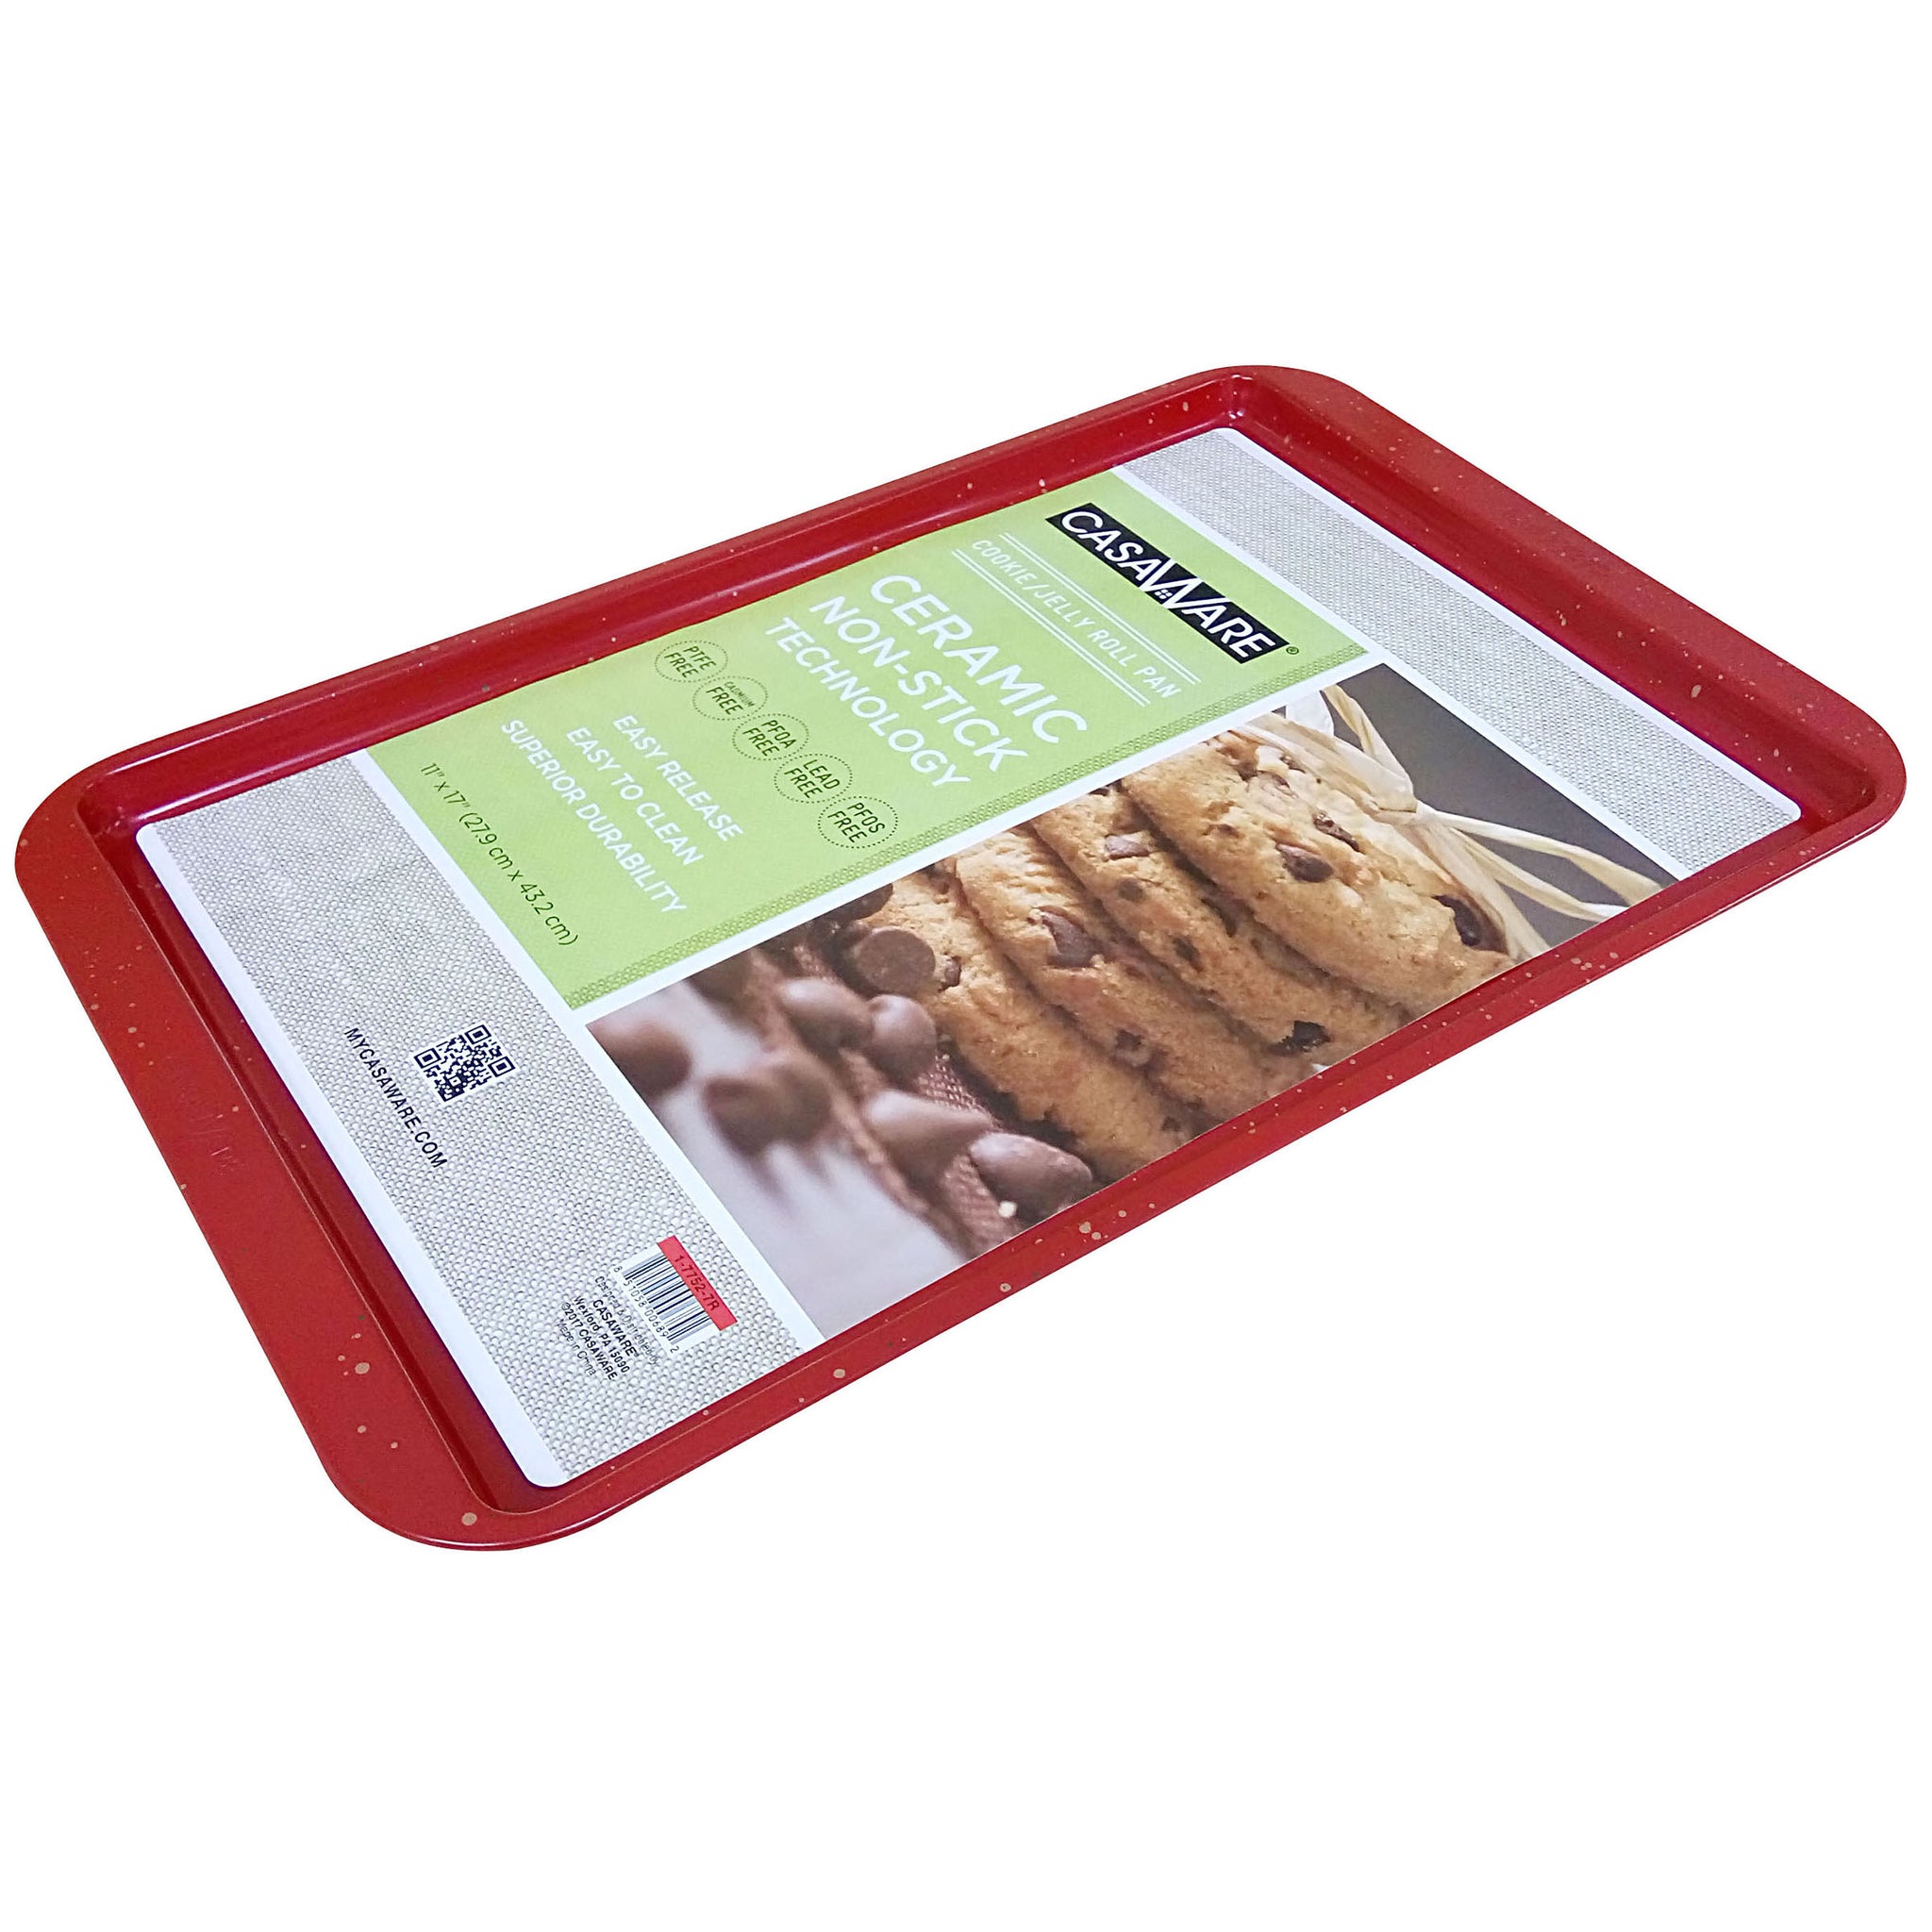 Libertyware 18 X 13 Inch Half Size Jelly Roll Cookie Sheet Pan